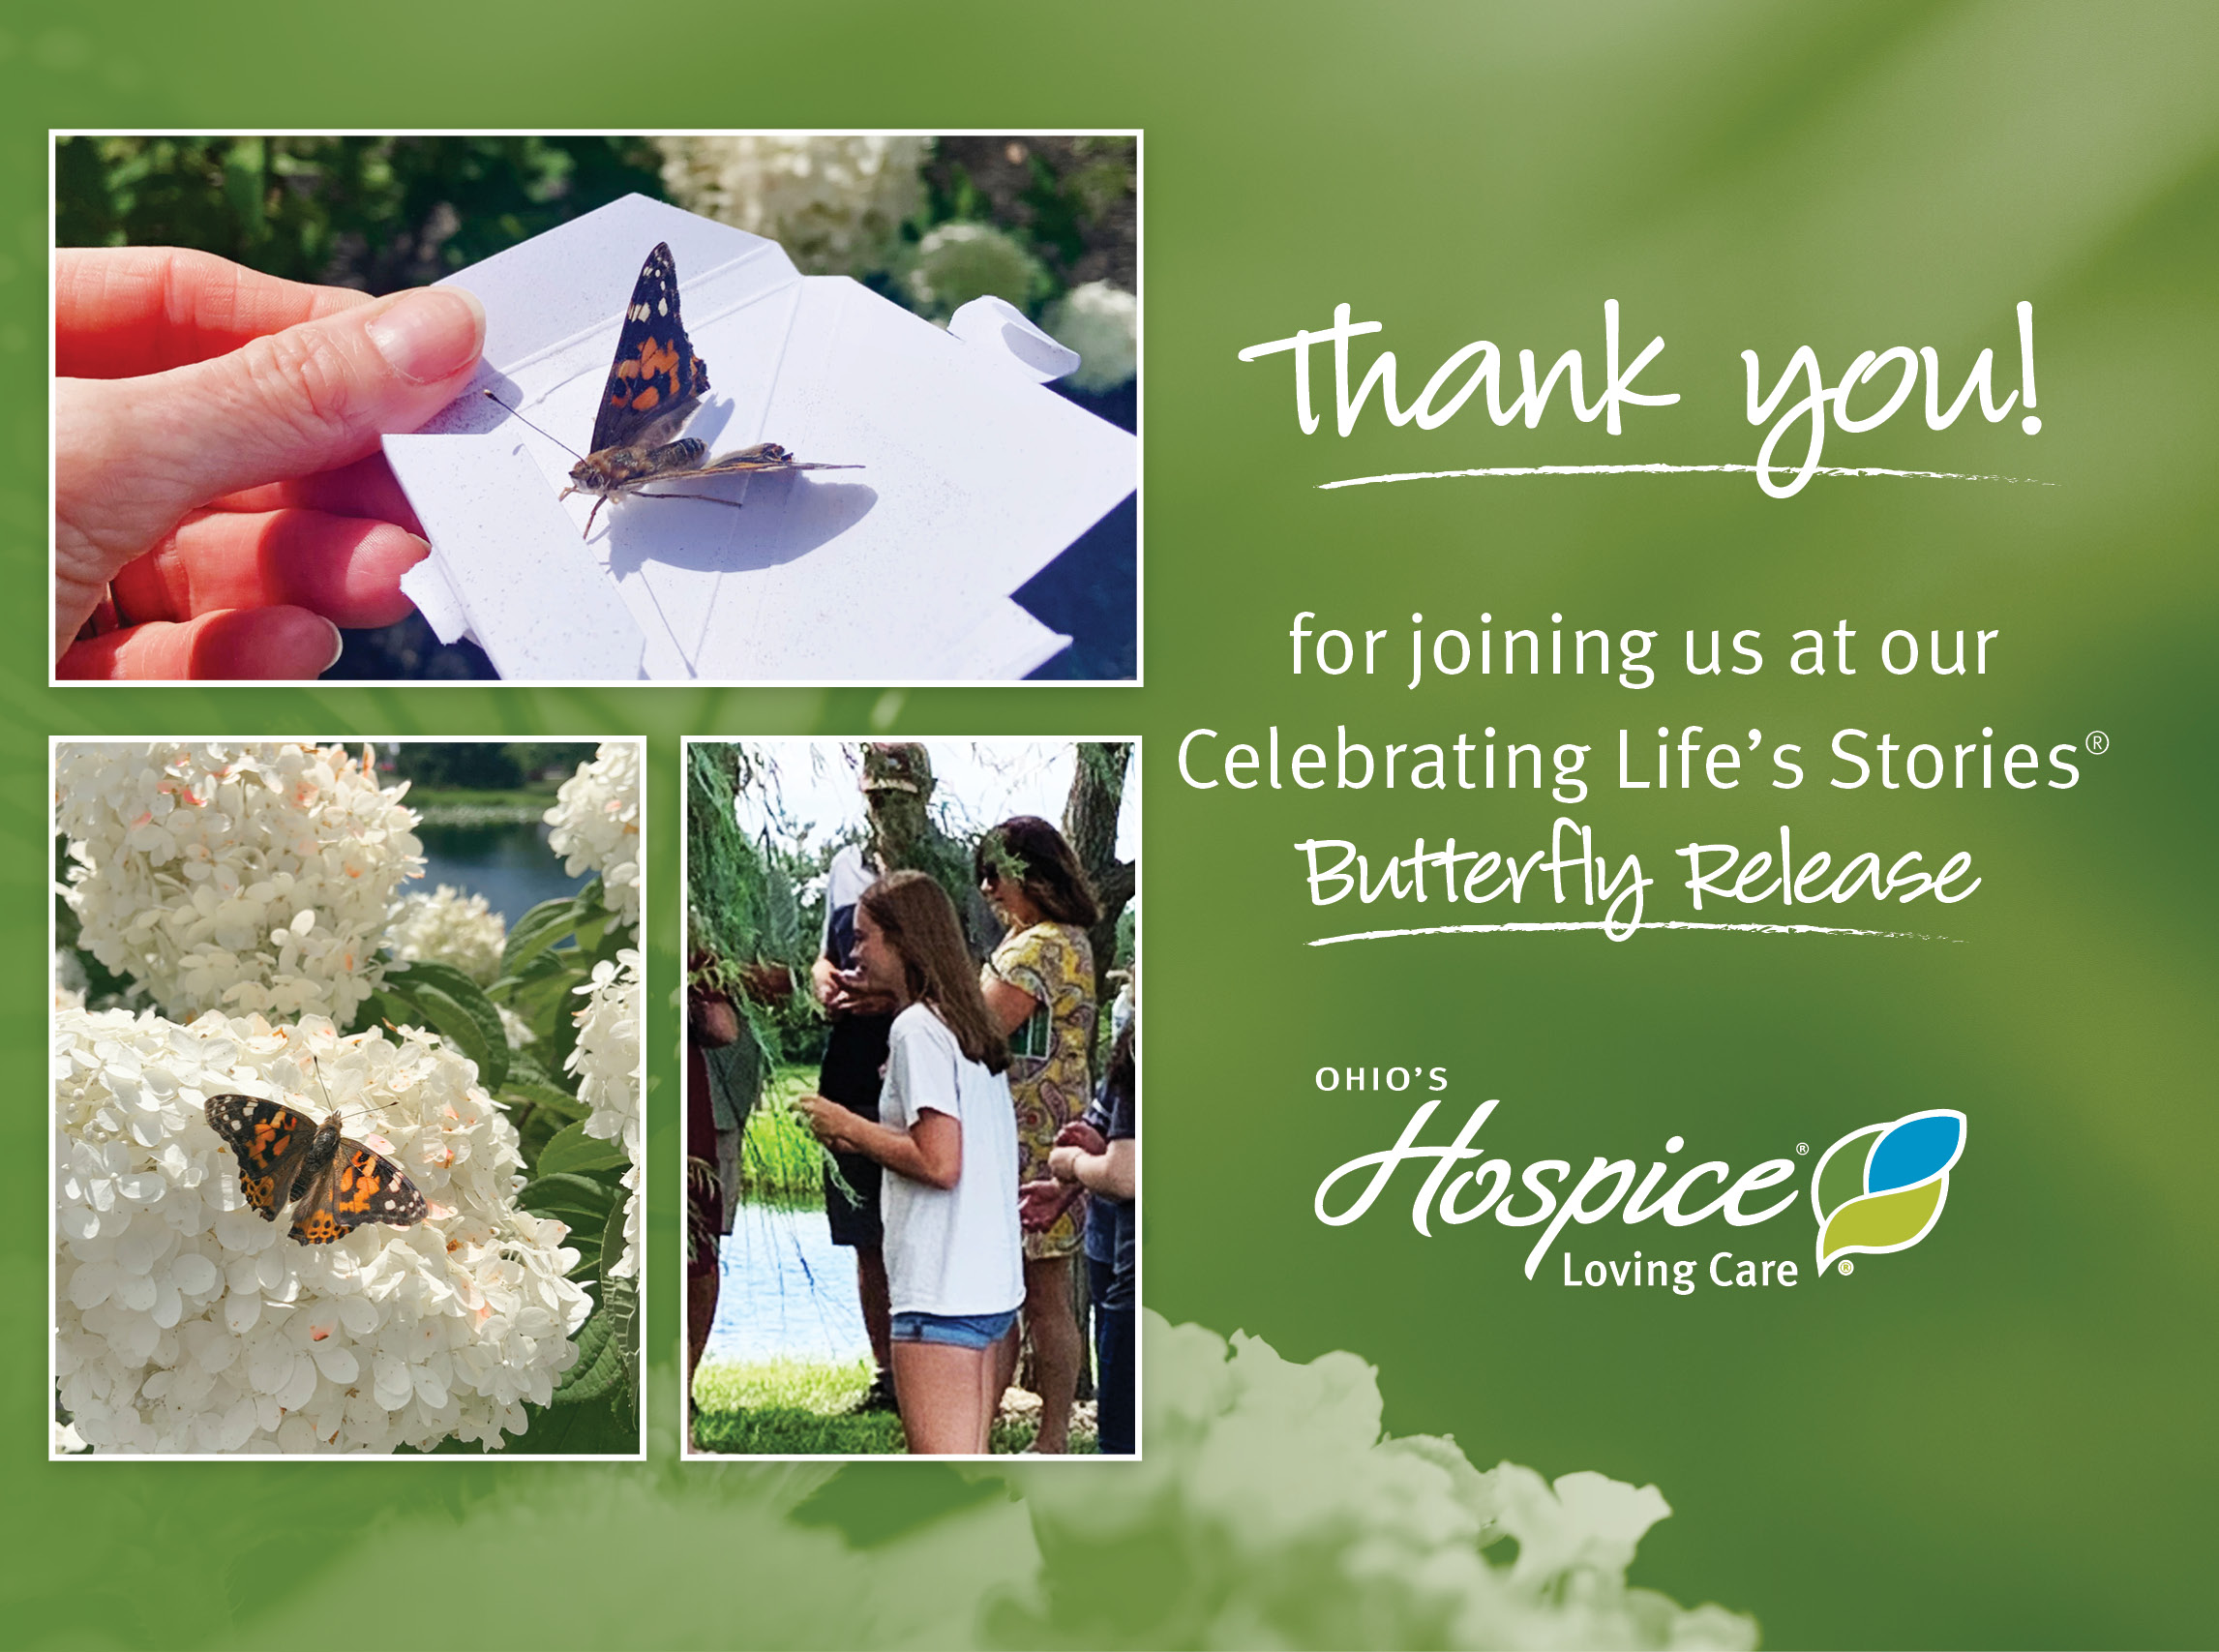 Ohio's Hospice Loving Care Butterfly Release